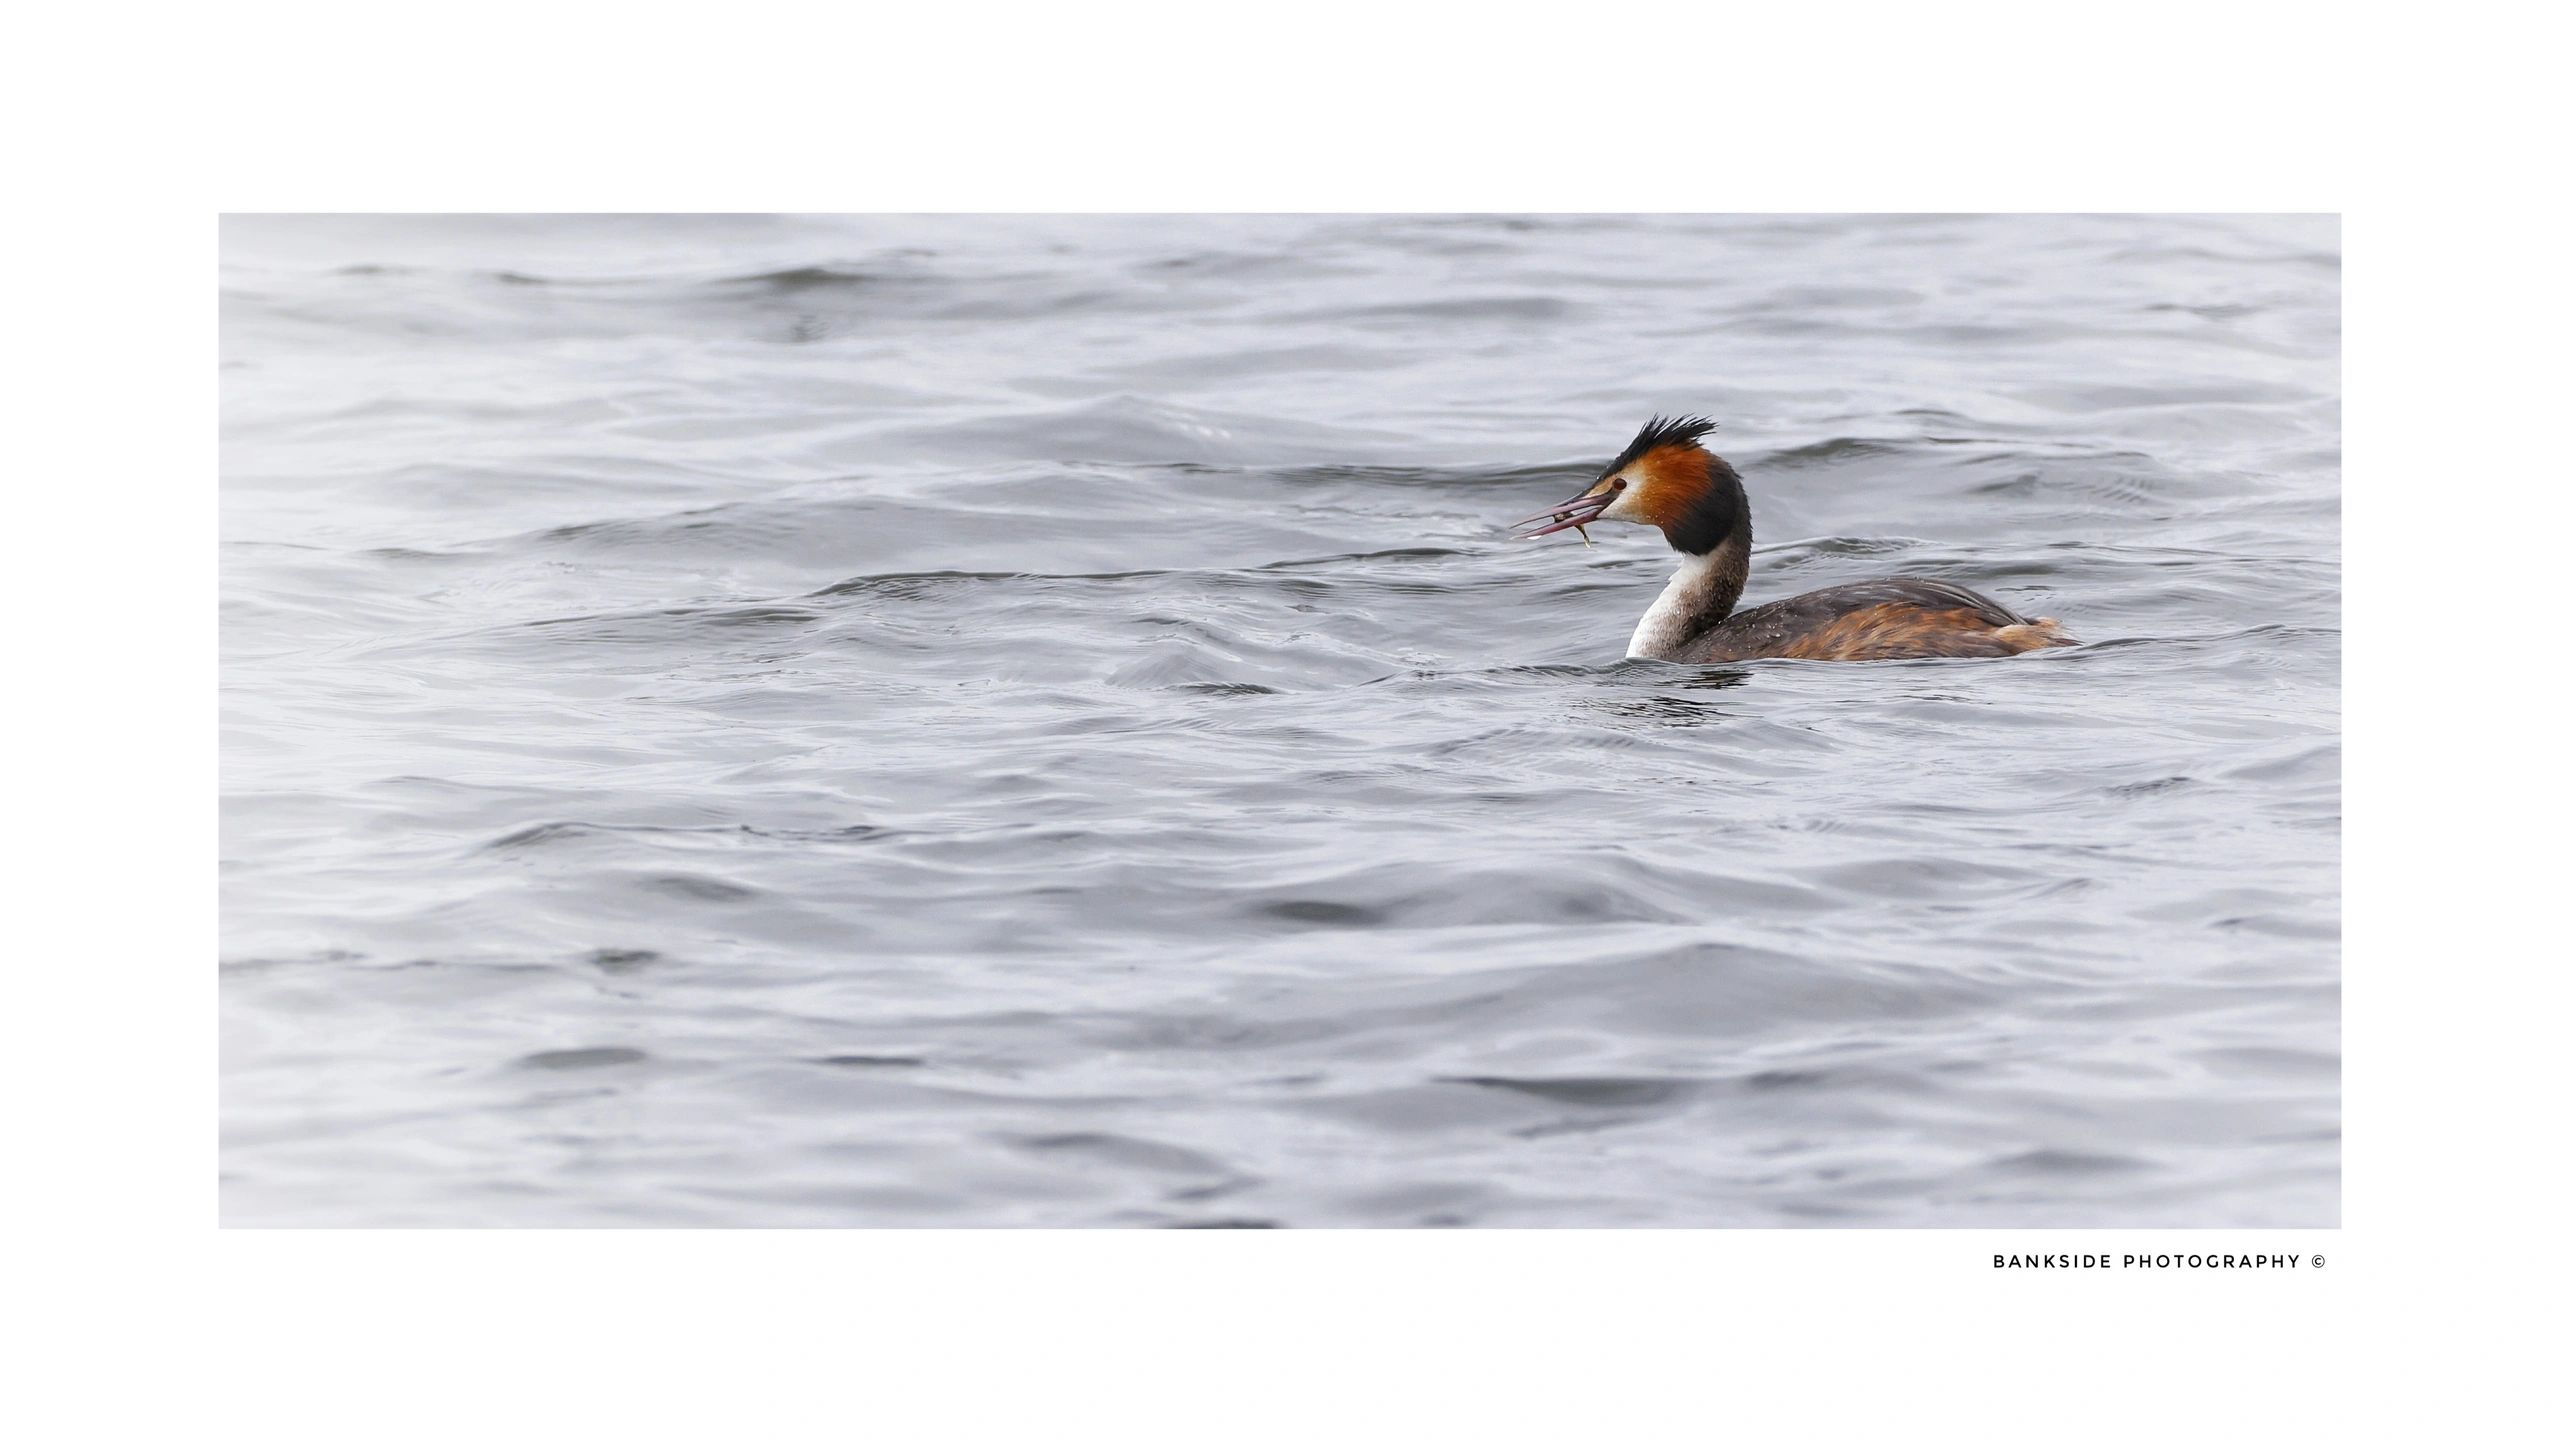 Great crested grebe
Fishing in choppy waters